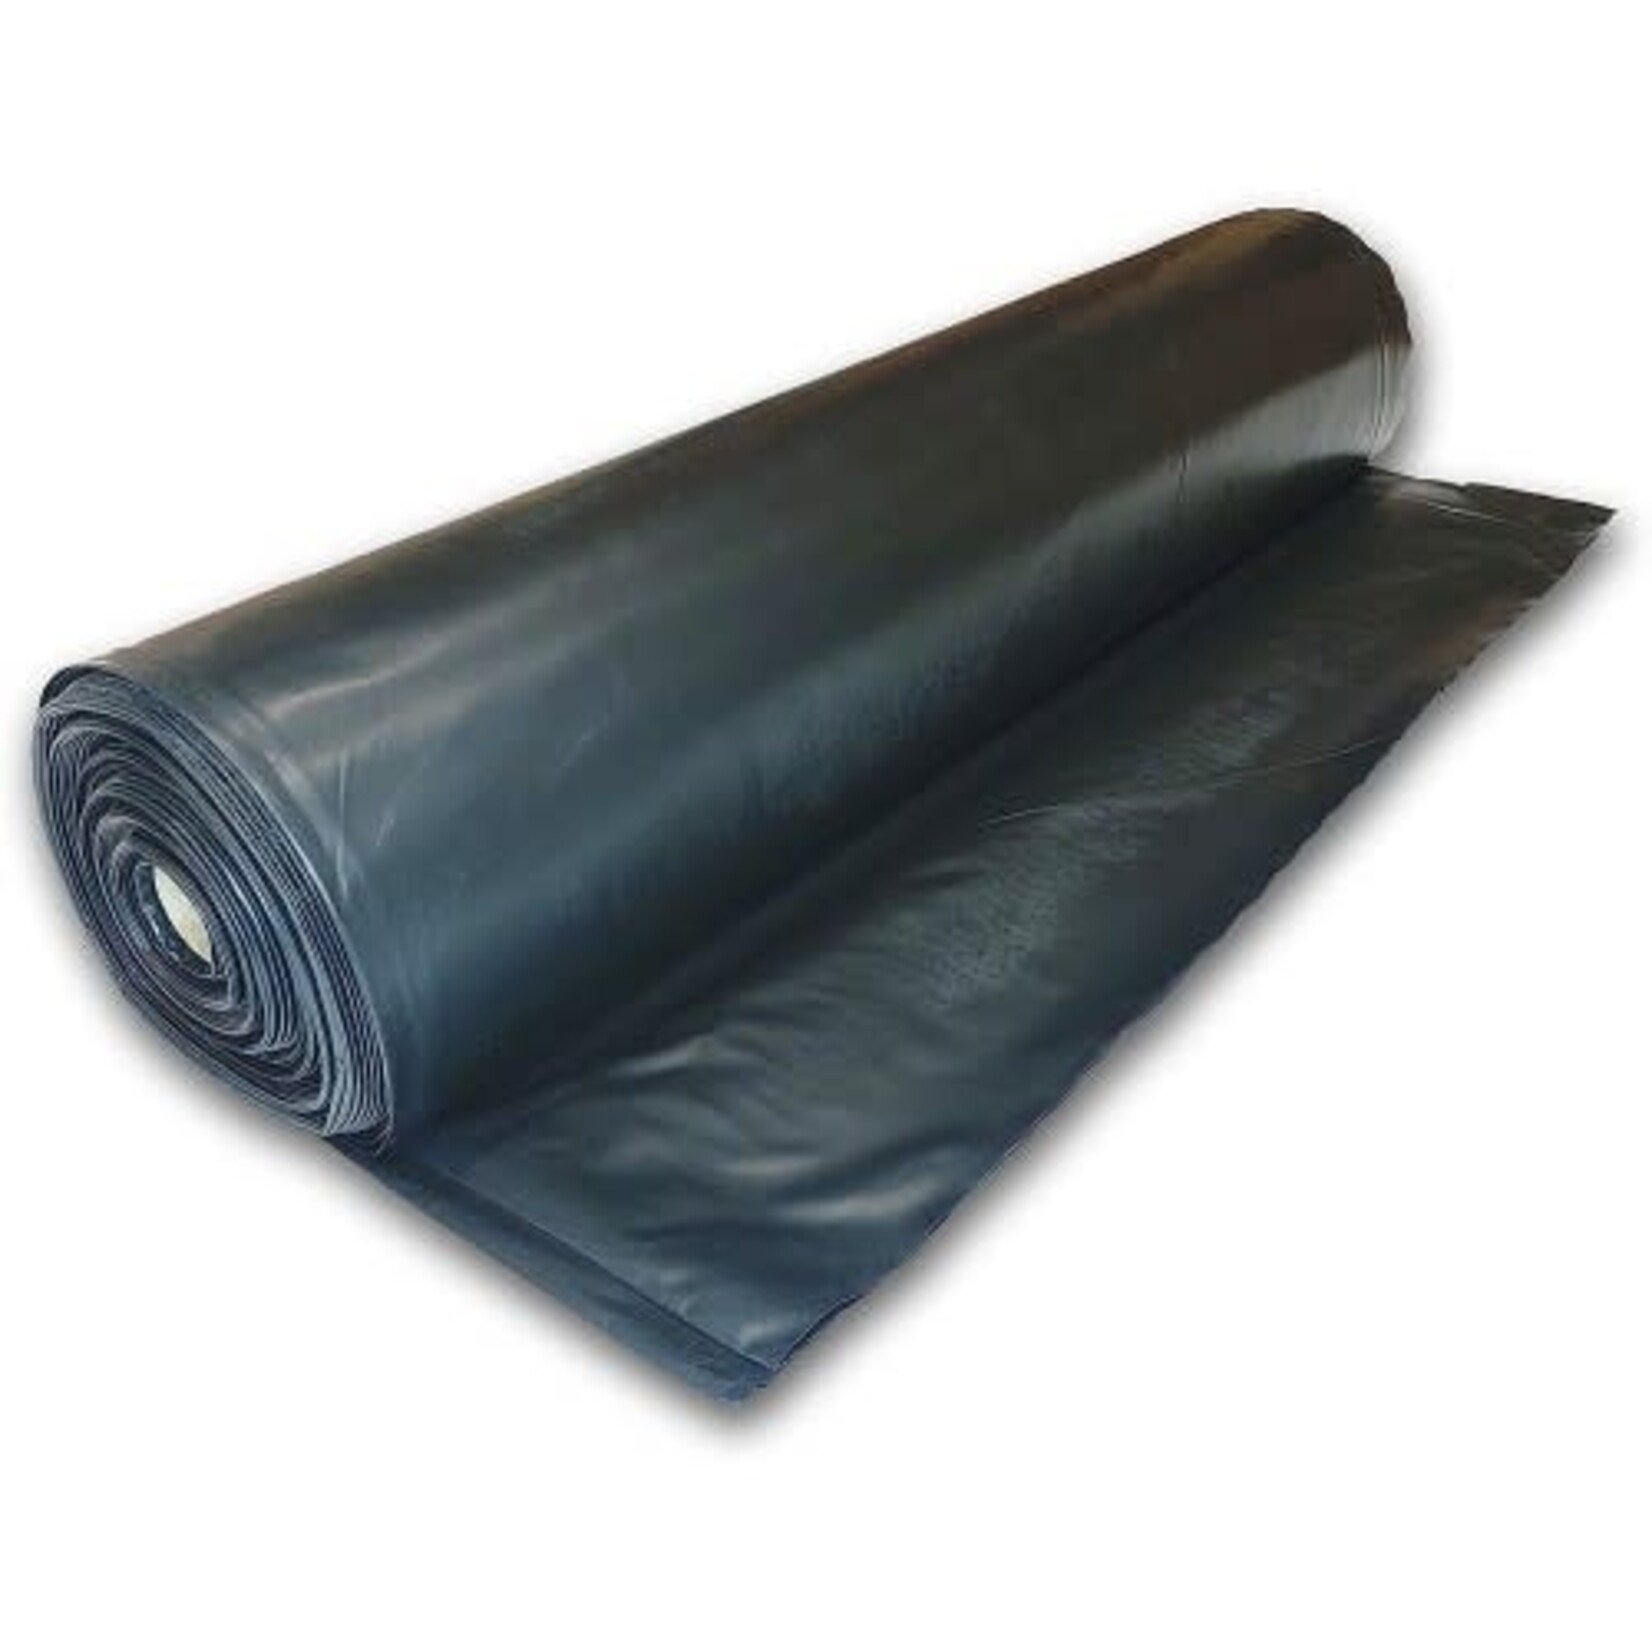 SteelCoat SteelCoat - Poly Sheeting - 6 MIL - 12' x 100' - Black